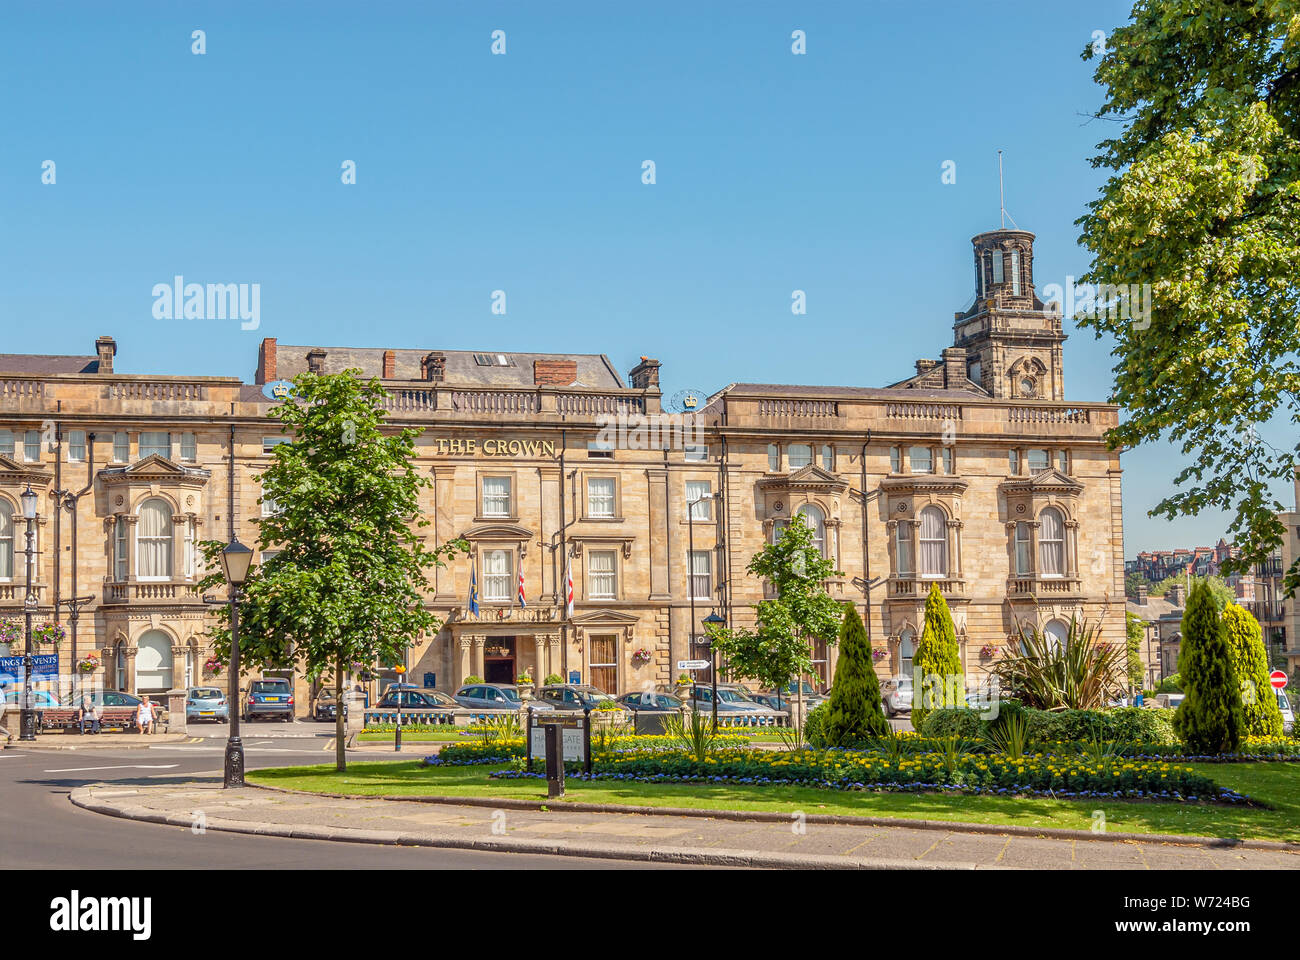 The Crown Hotel in Harrogate a spa town in North Yorkshire, England Stock Photo